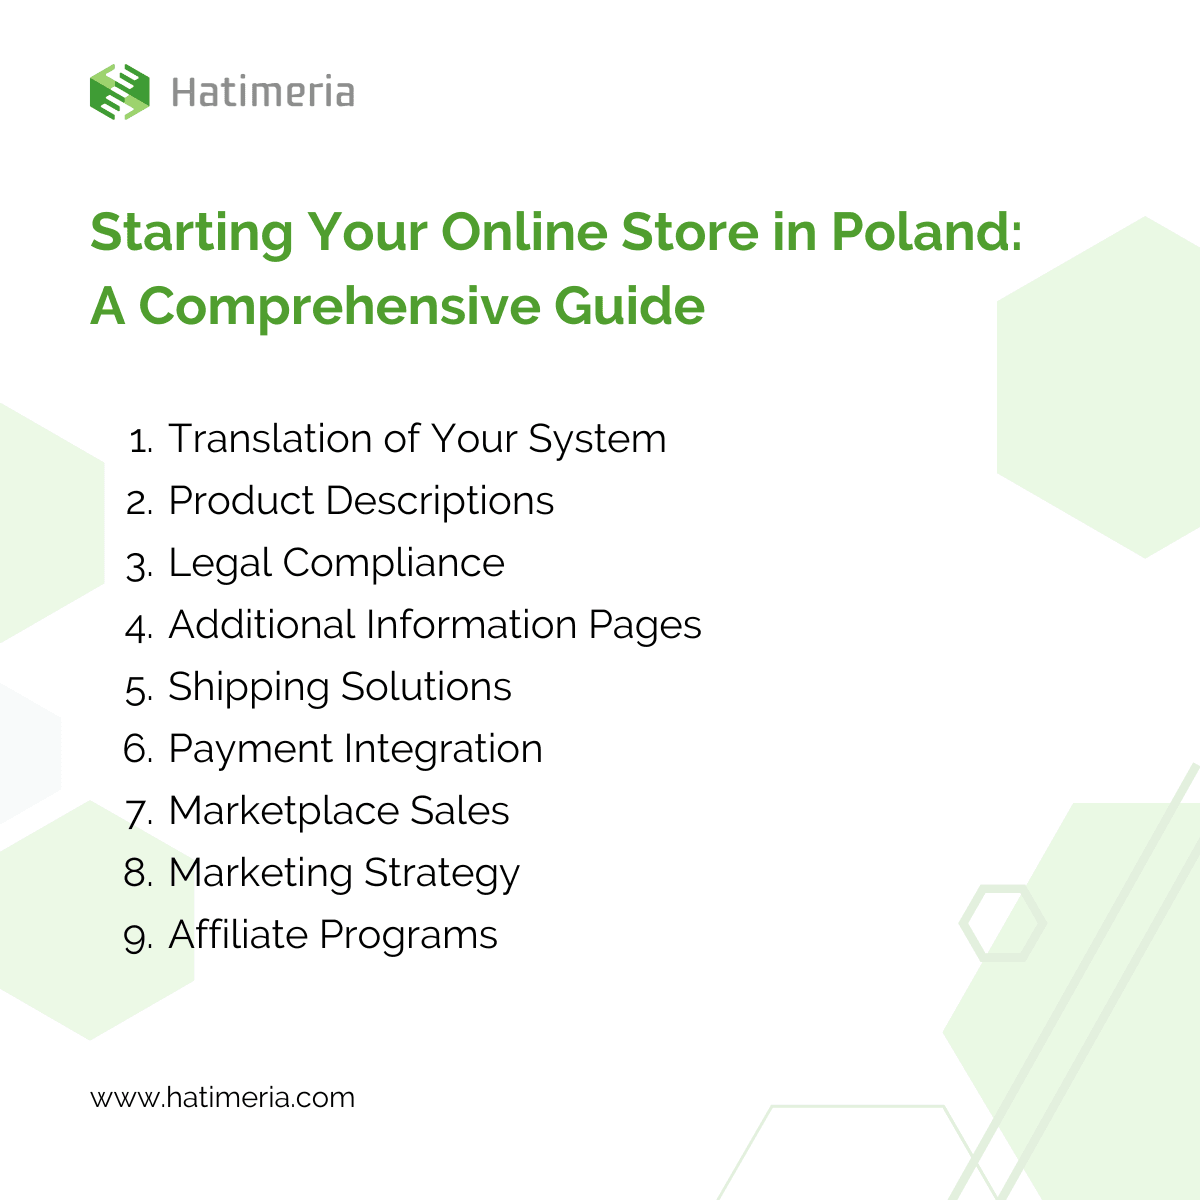 How to Start an Online Store in Poland_Hatimeria